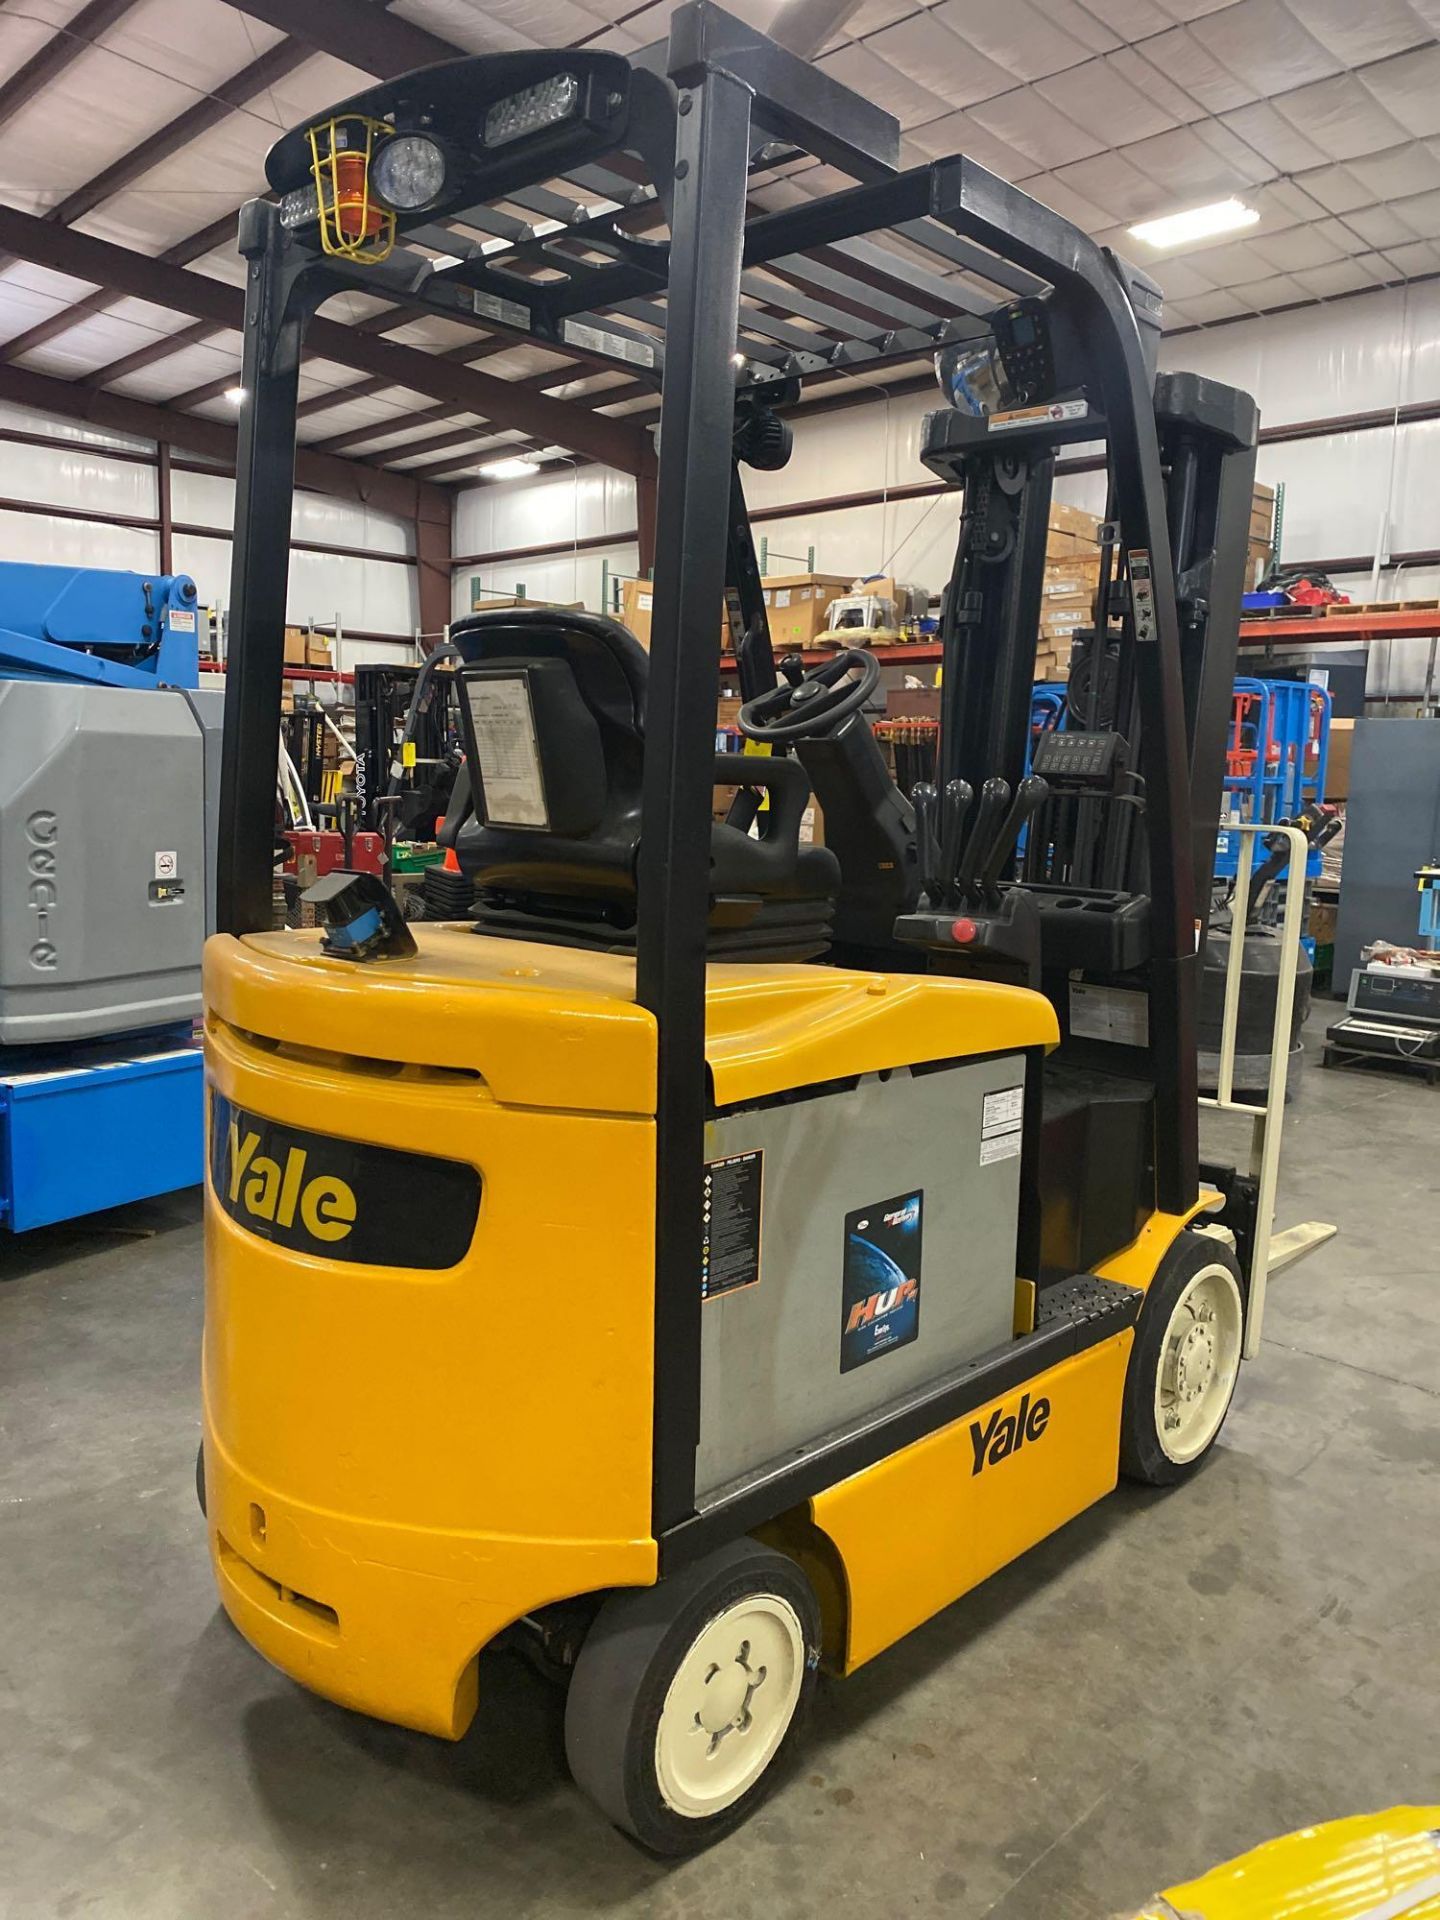 YALE ELECTRIC FORKLIFT MODEL ERCO50VGN36TE088, 36V, 200.8" HEIGHT CAPACITY, APPROX. 5,000 LB CAPACIT - Image 4 of 9